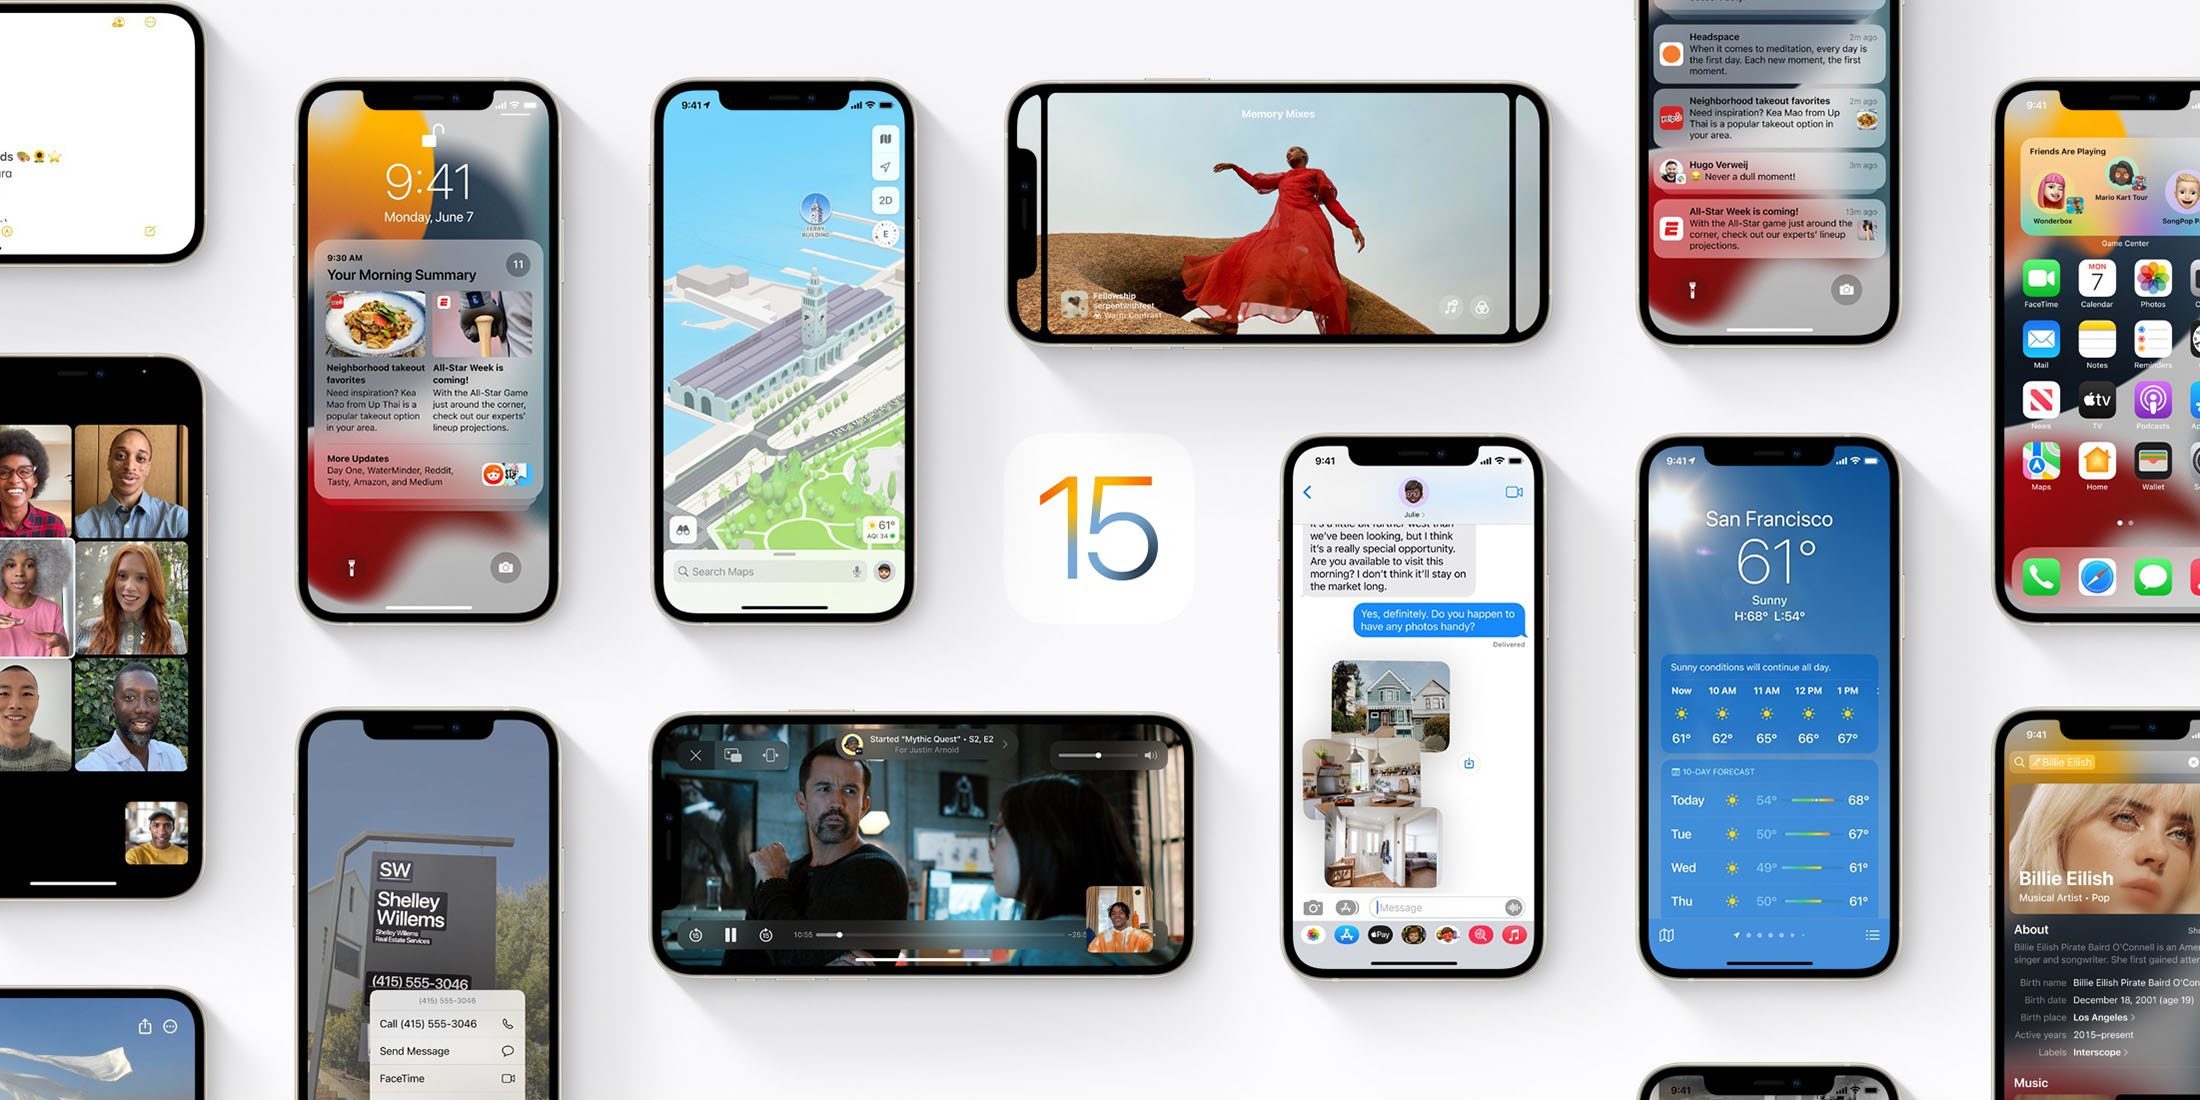 IOS 15.0.2 IS NOW AVAILABLE WITH SEVERAL BUG FIXES AND SECURITY UPDATES